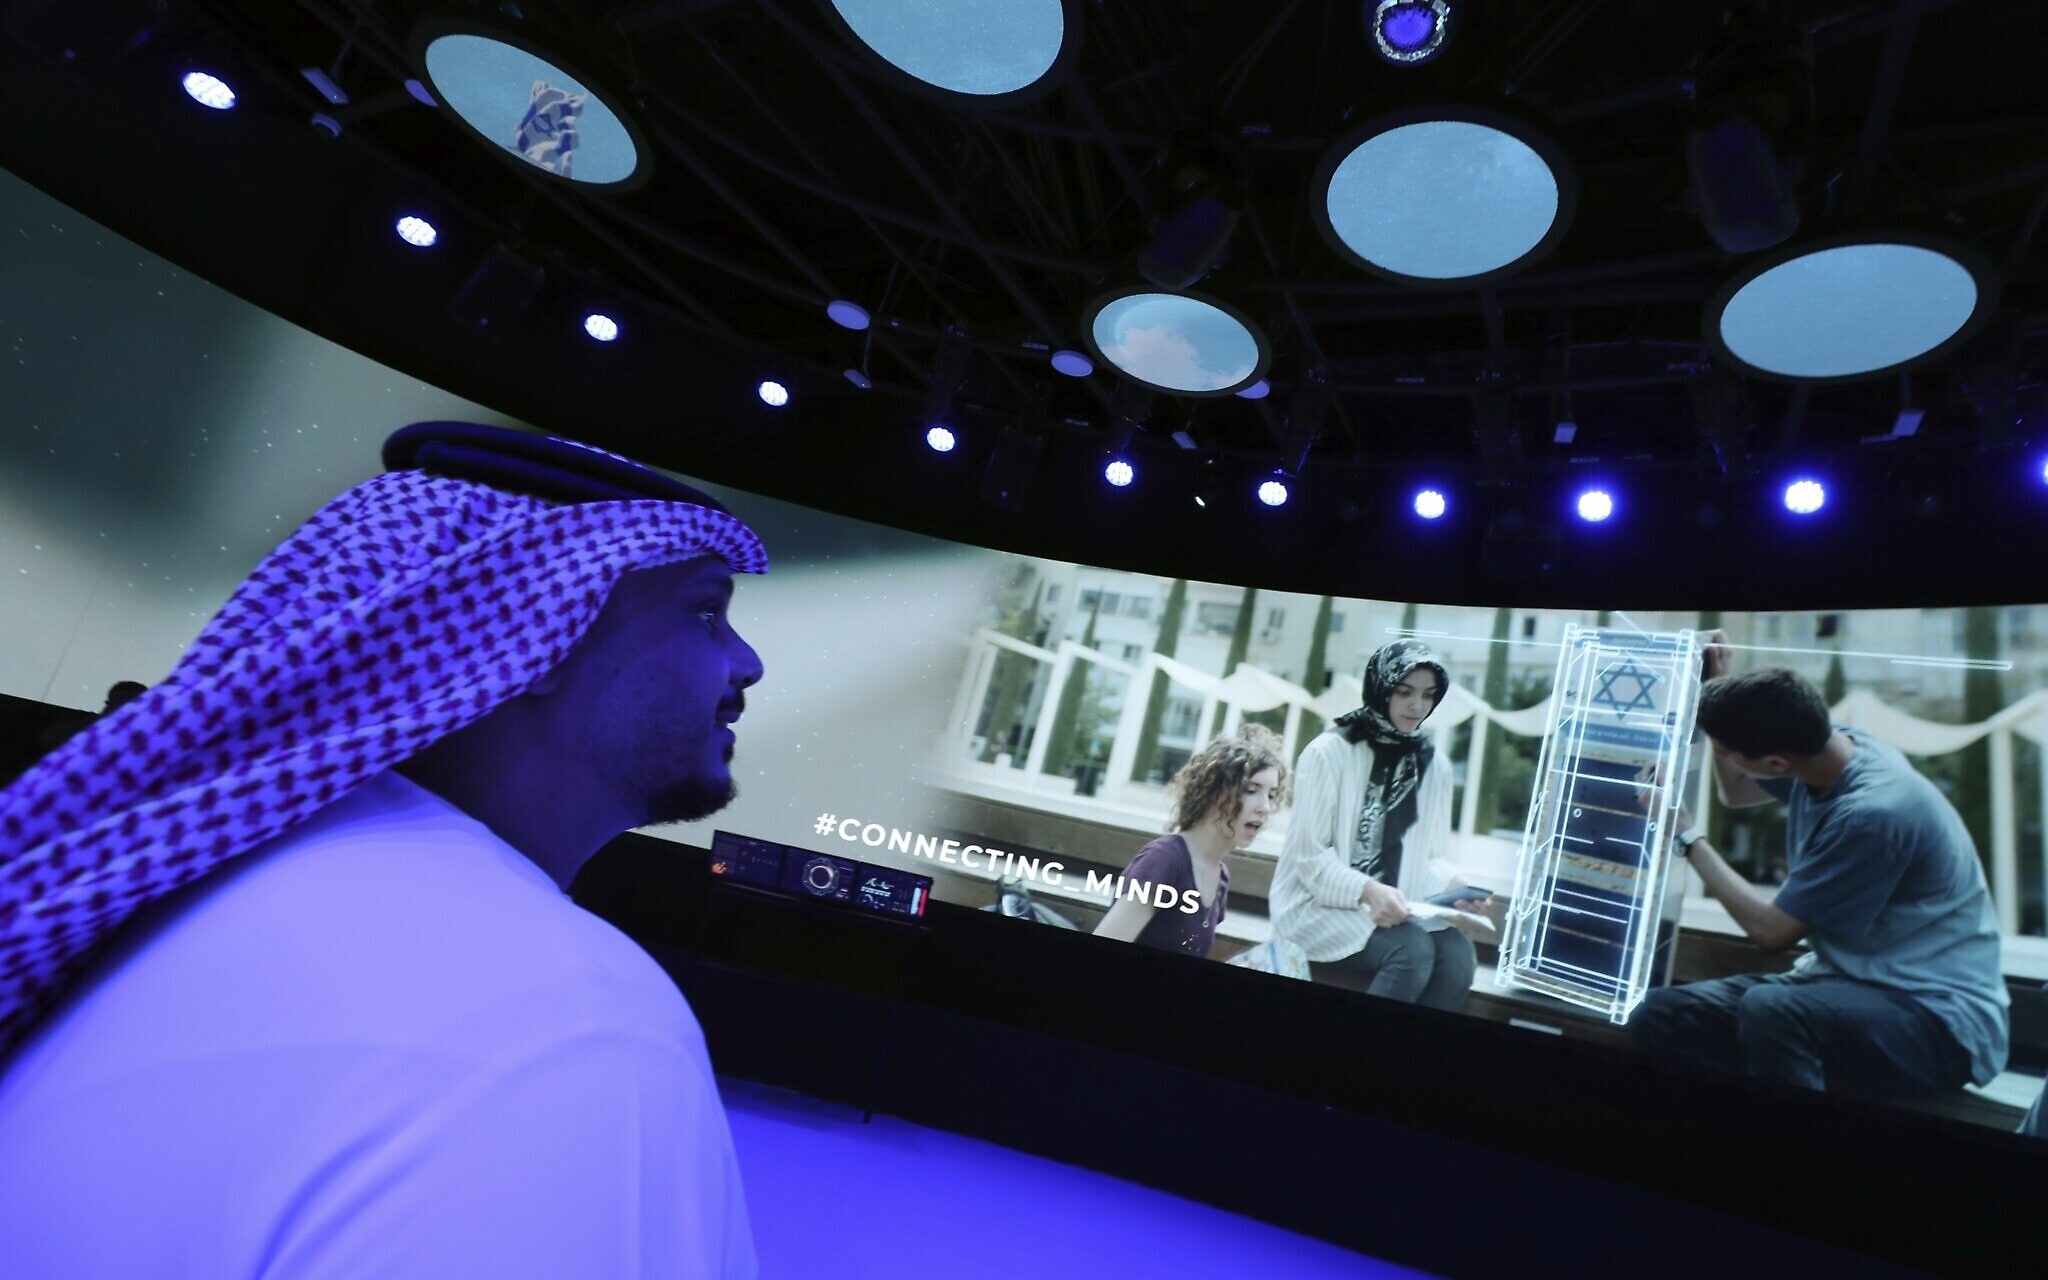 Party's over as Dubai's Expo 2020 comes to a close after 6 months